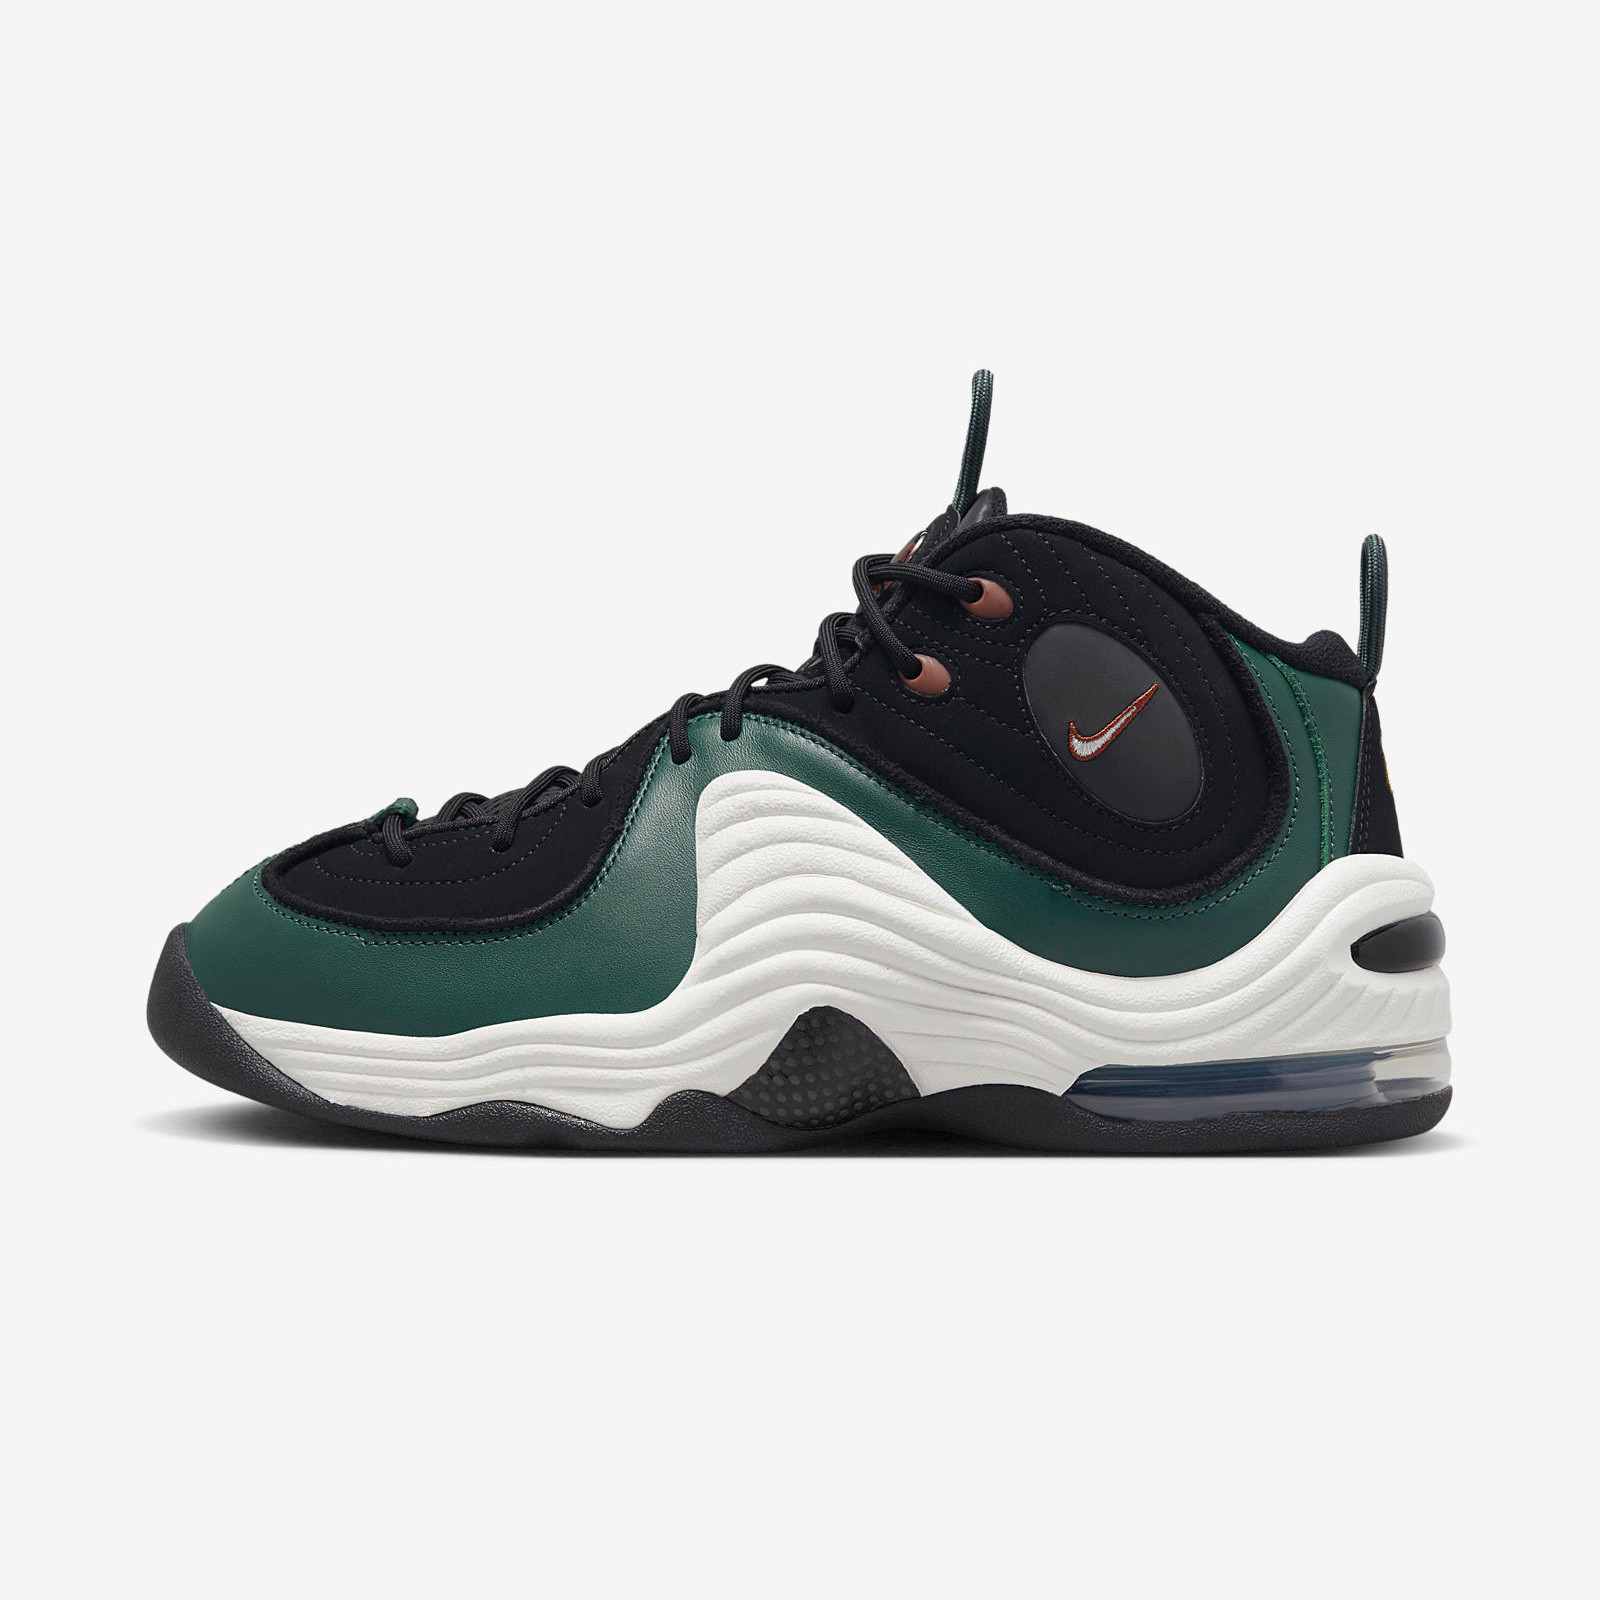 Nike Air Penny 2
« Faded Spruce »